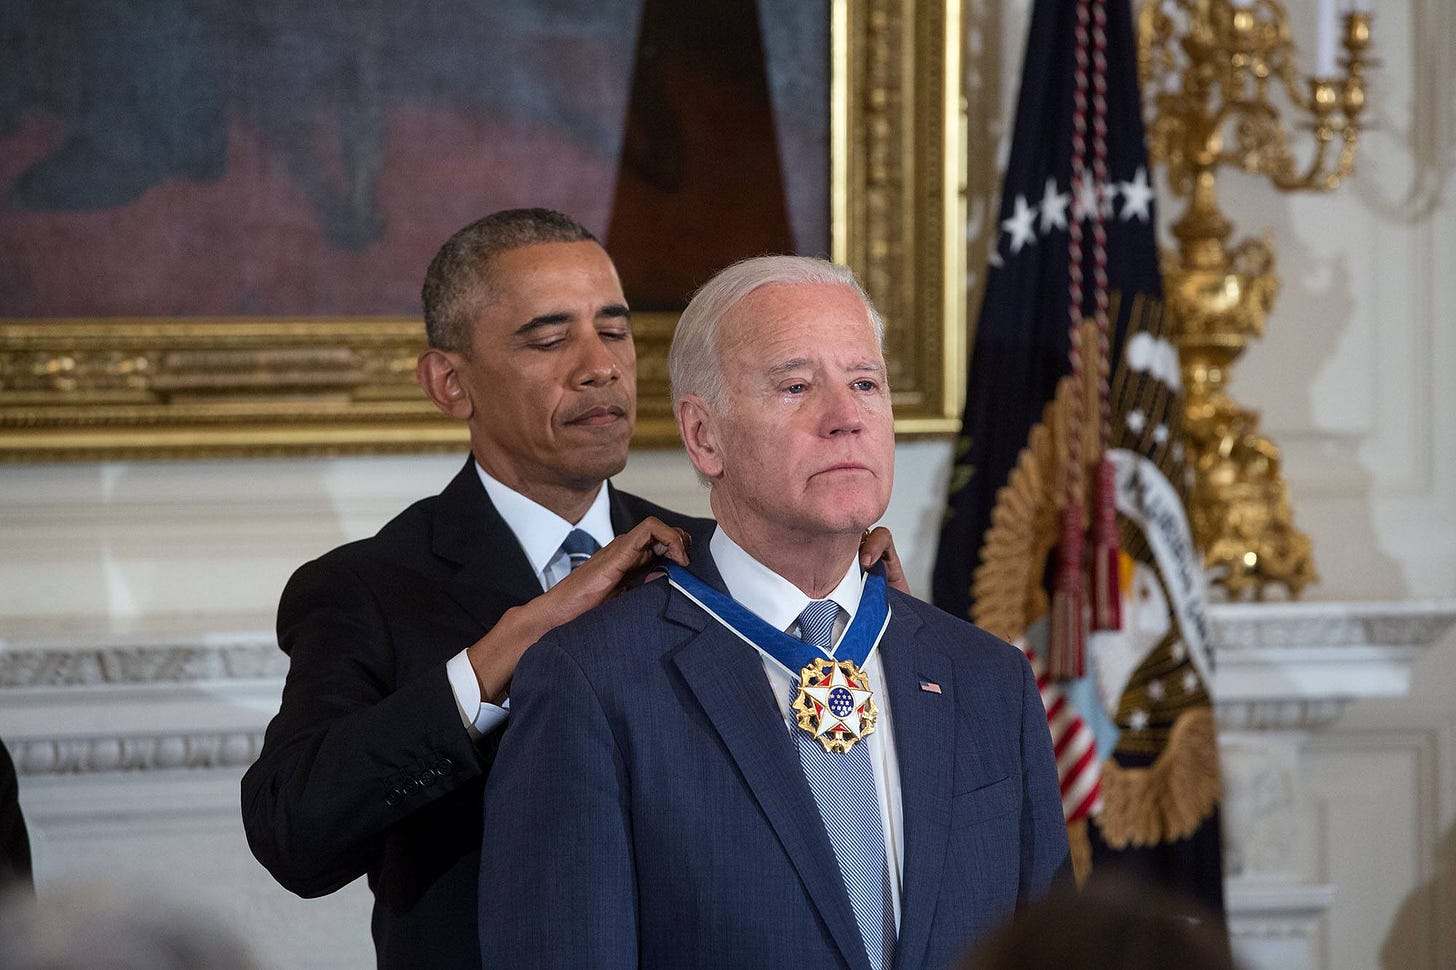 Photo of Obama placing a medal on Biden, who looks emotional but solemn